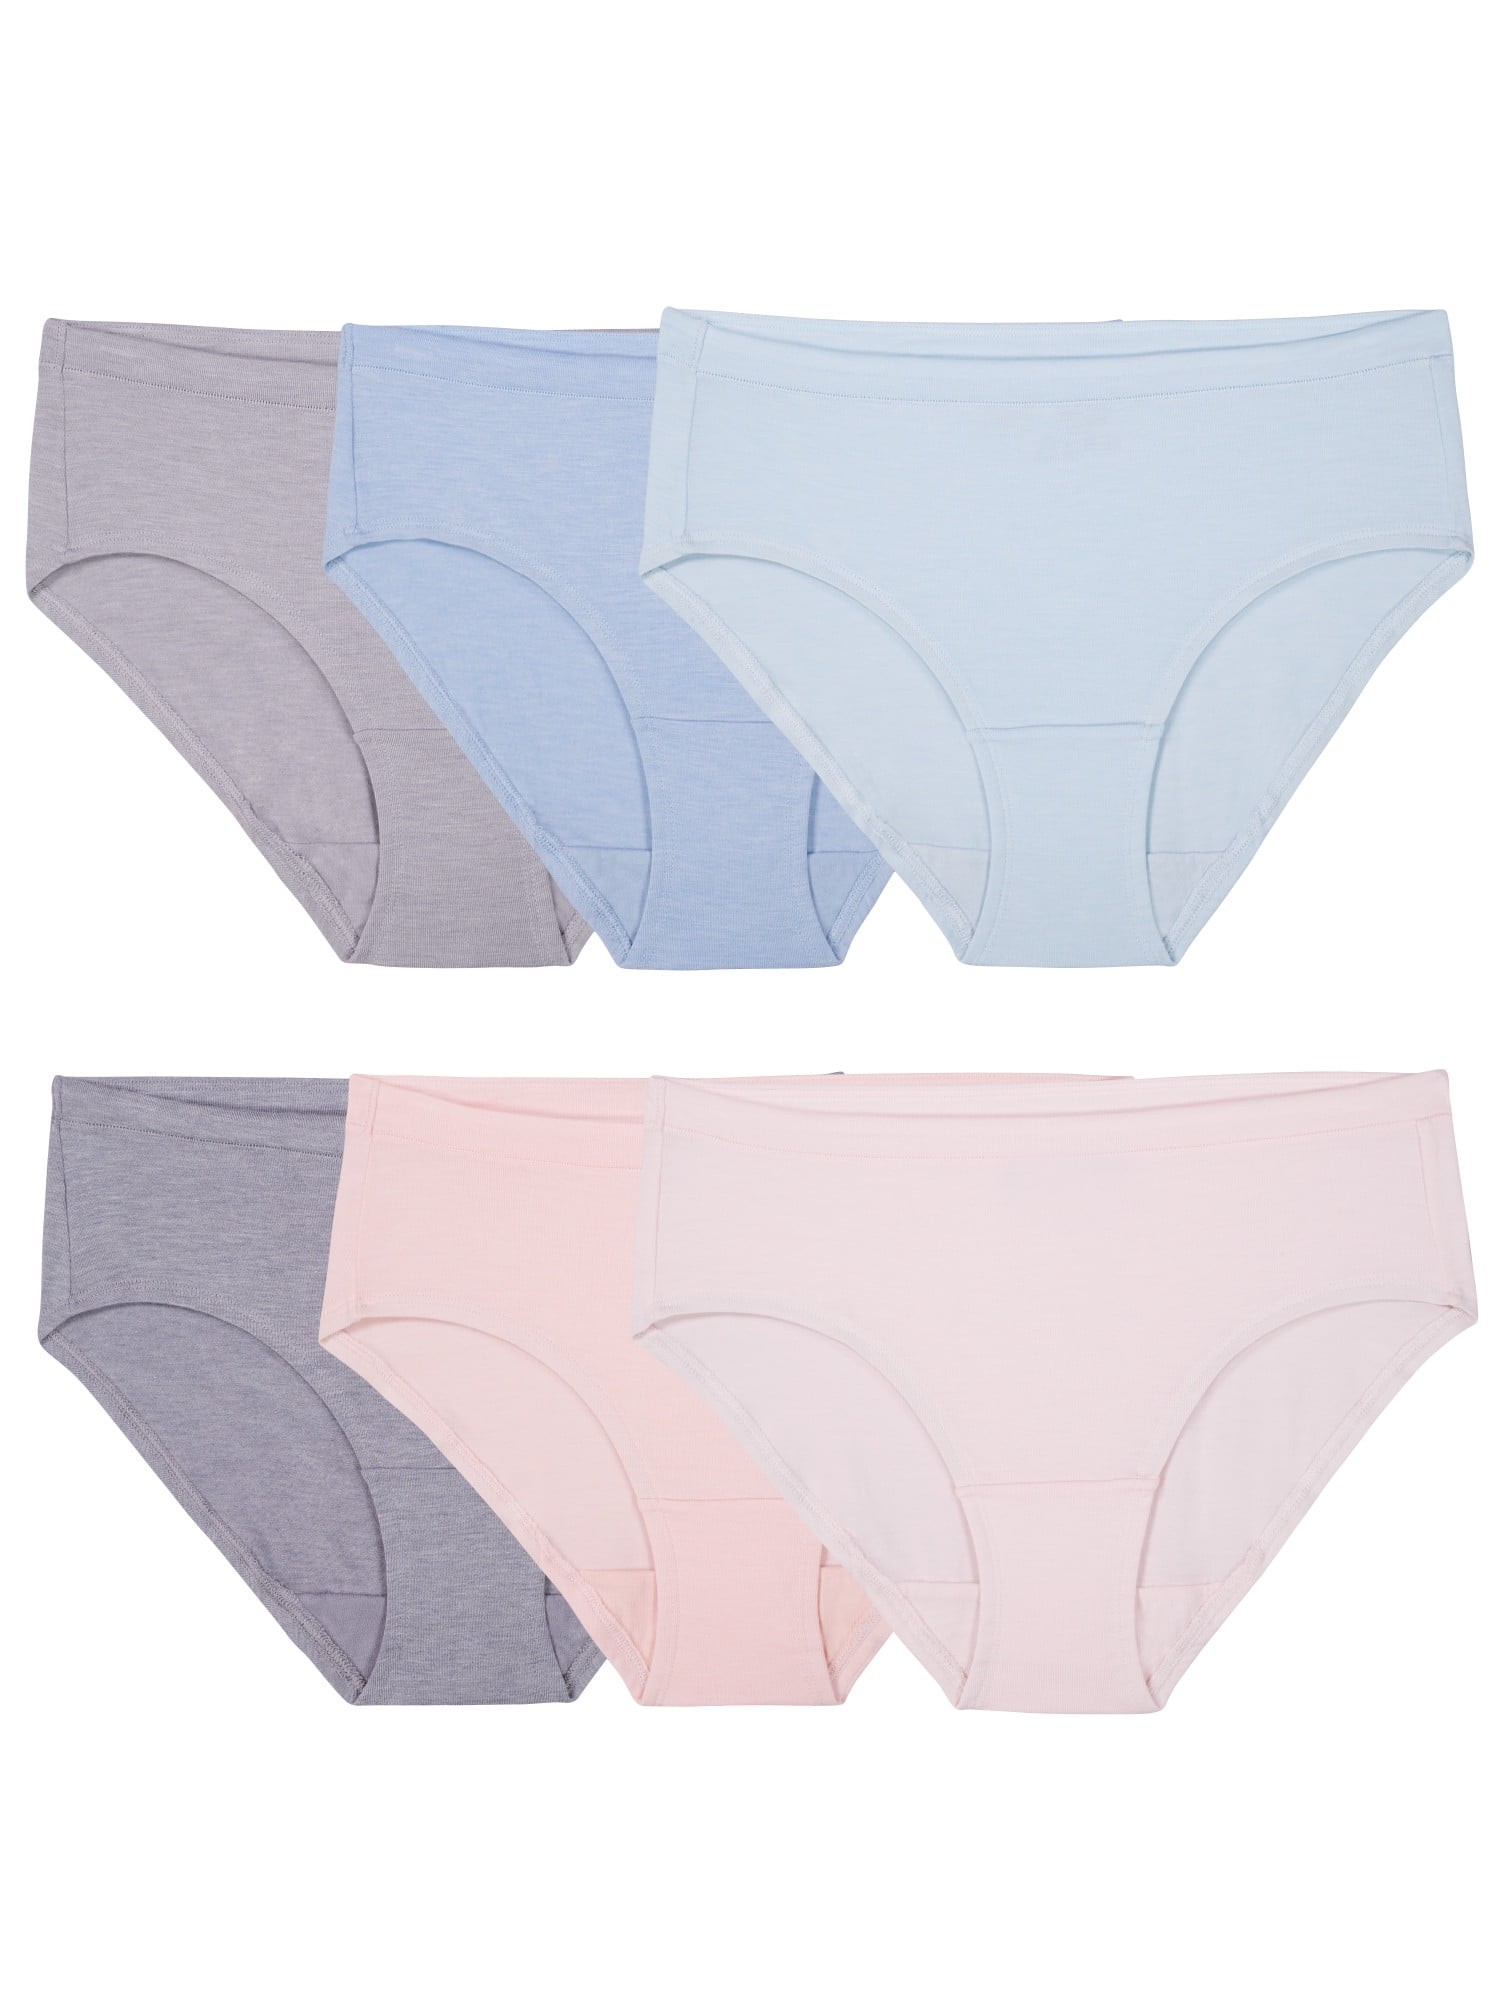 Fruit of the Loom Women's 6pk 360 Stretch Seamless Hipster